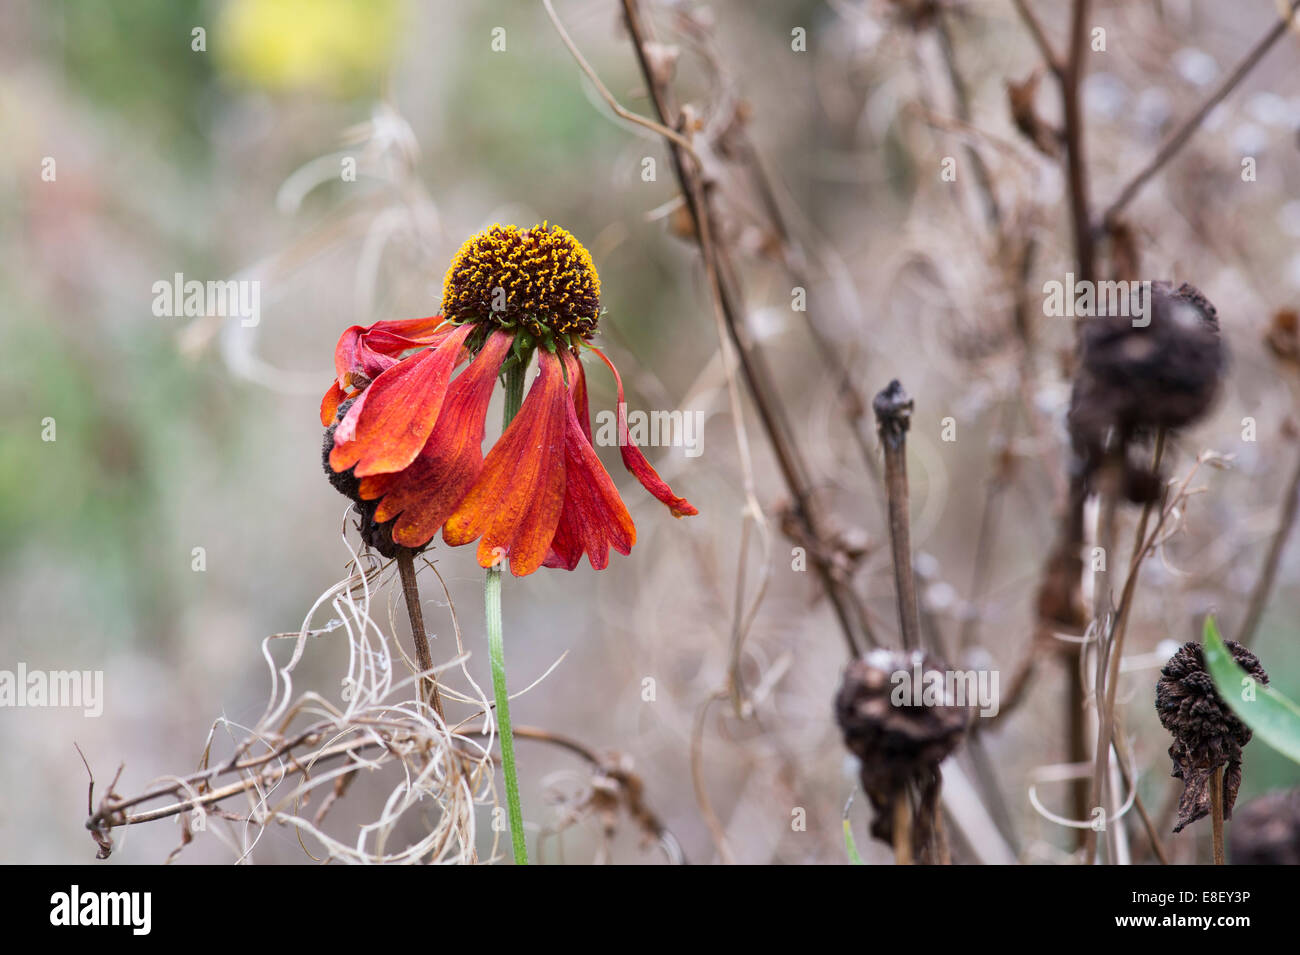 Helenium. Dying sneezeweed flower at the end of the season Stock Photo